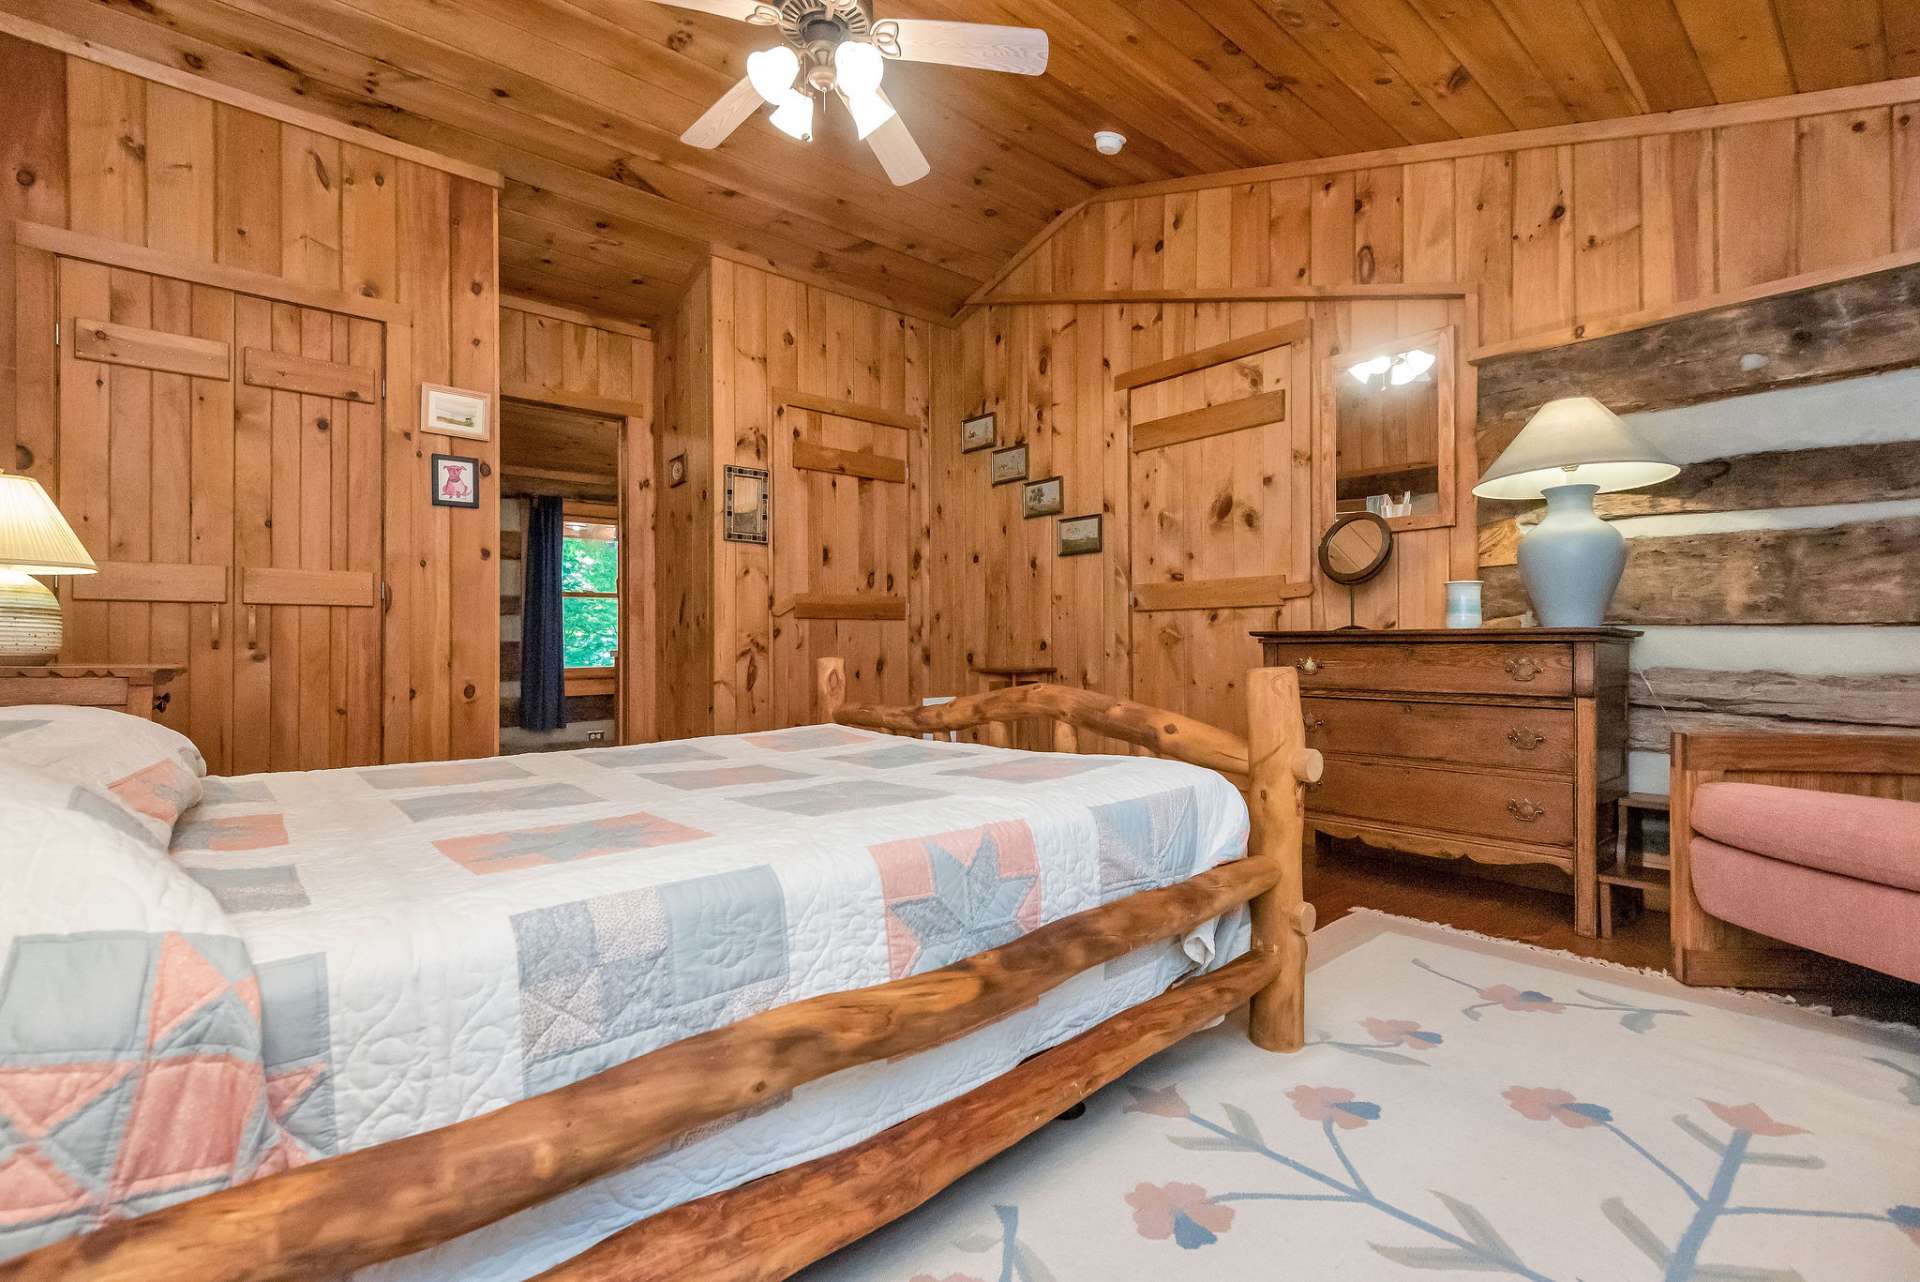 The guest room features vaulted ceilings, double closets, and an entry to the loft bath.